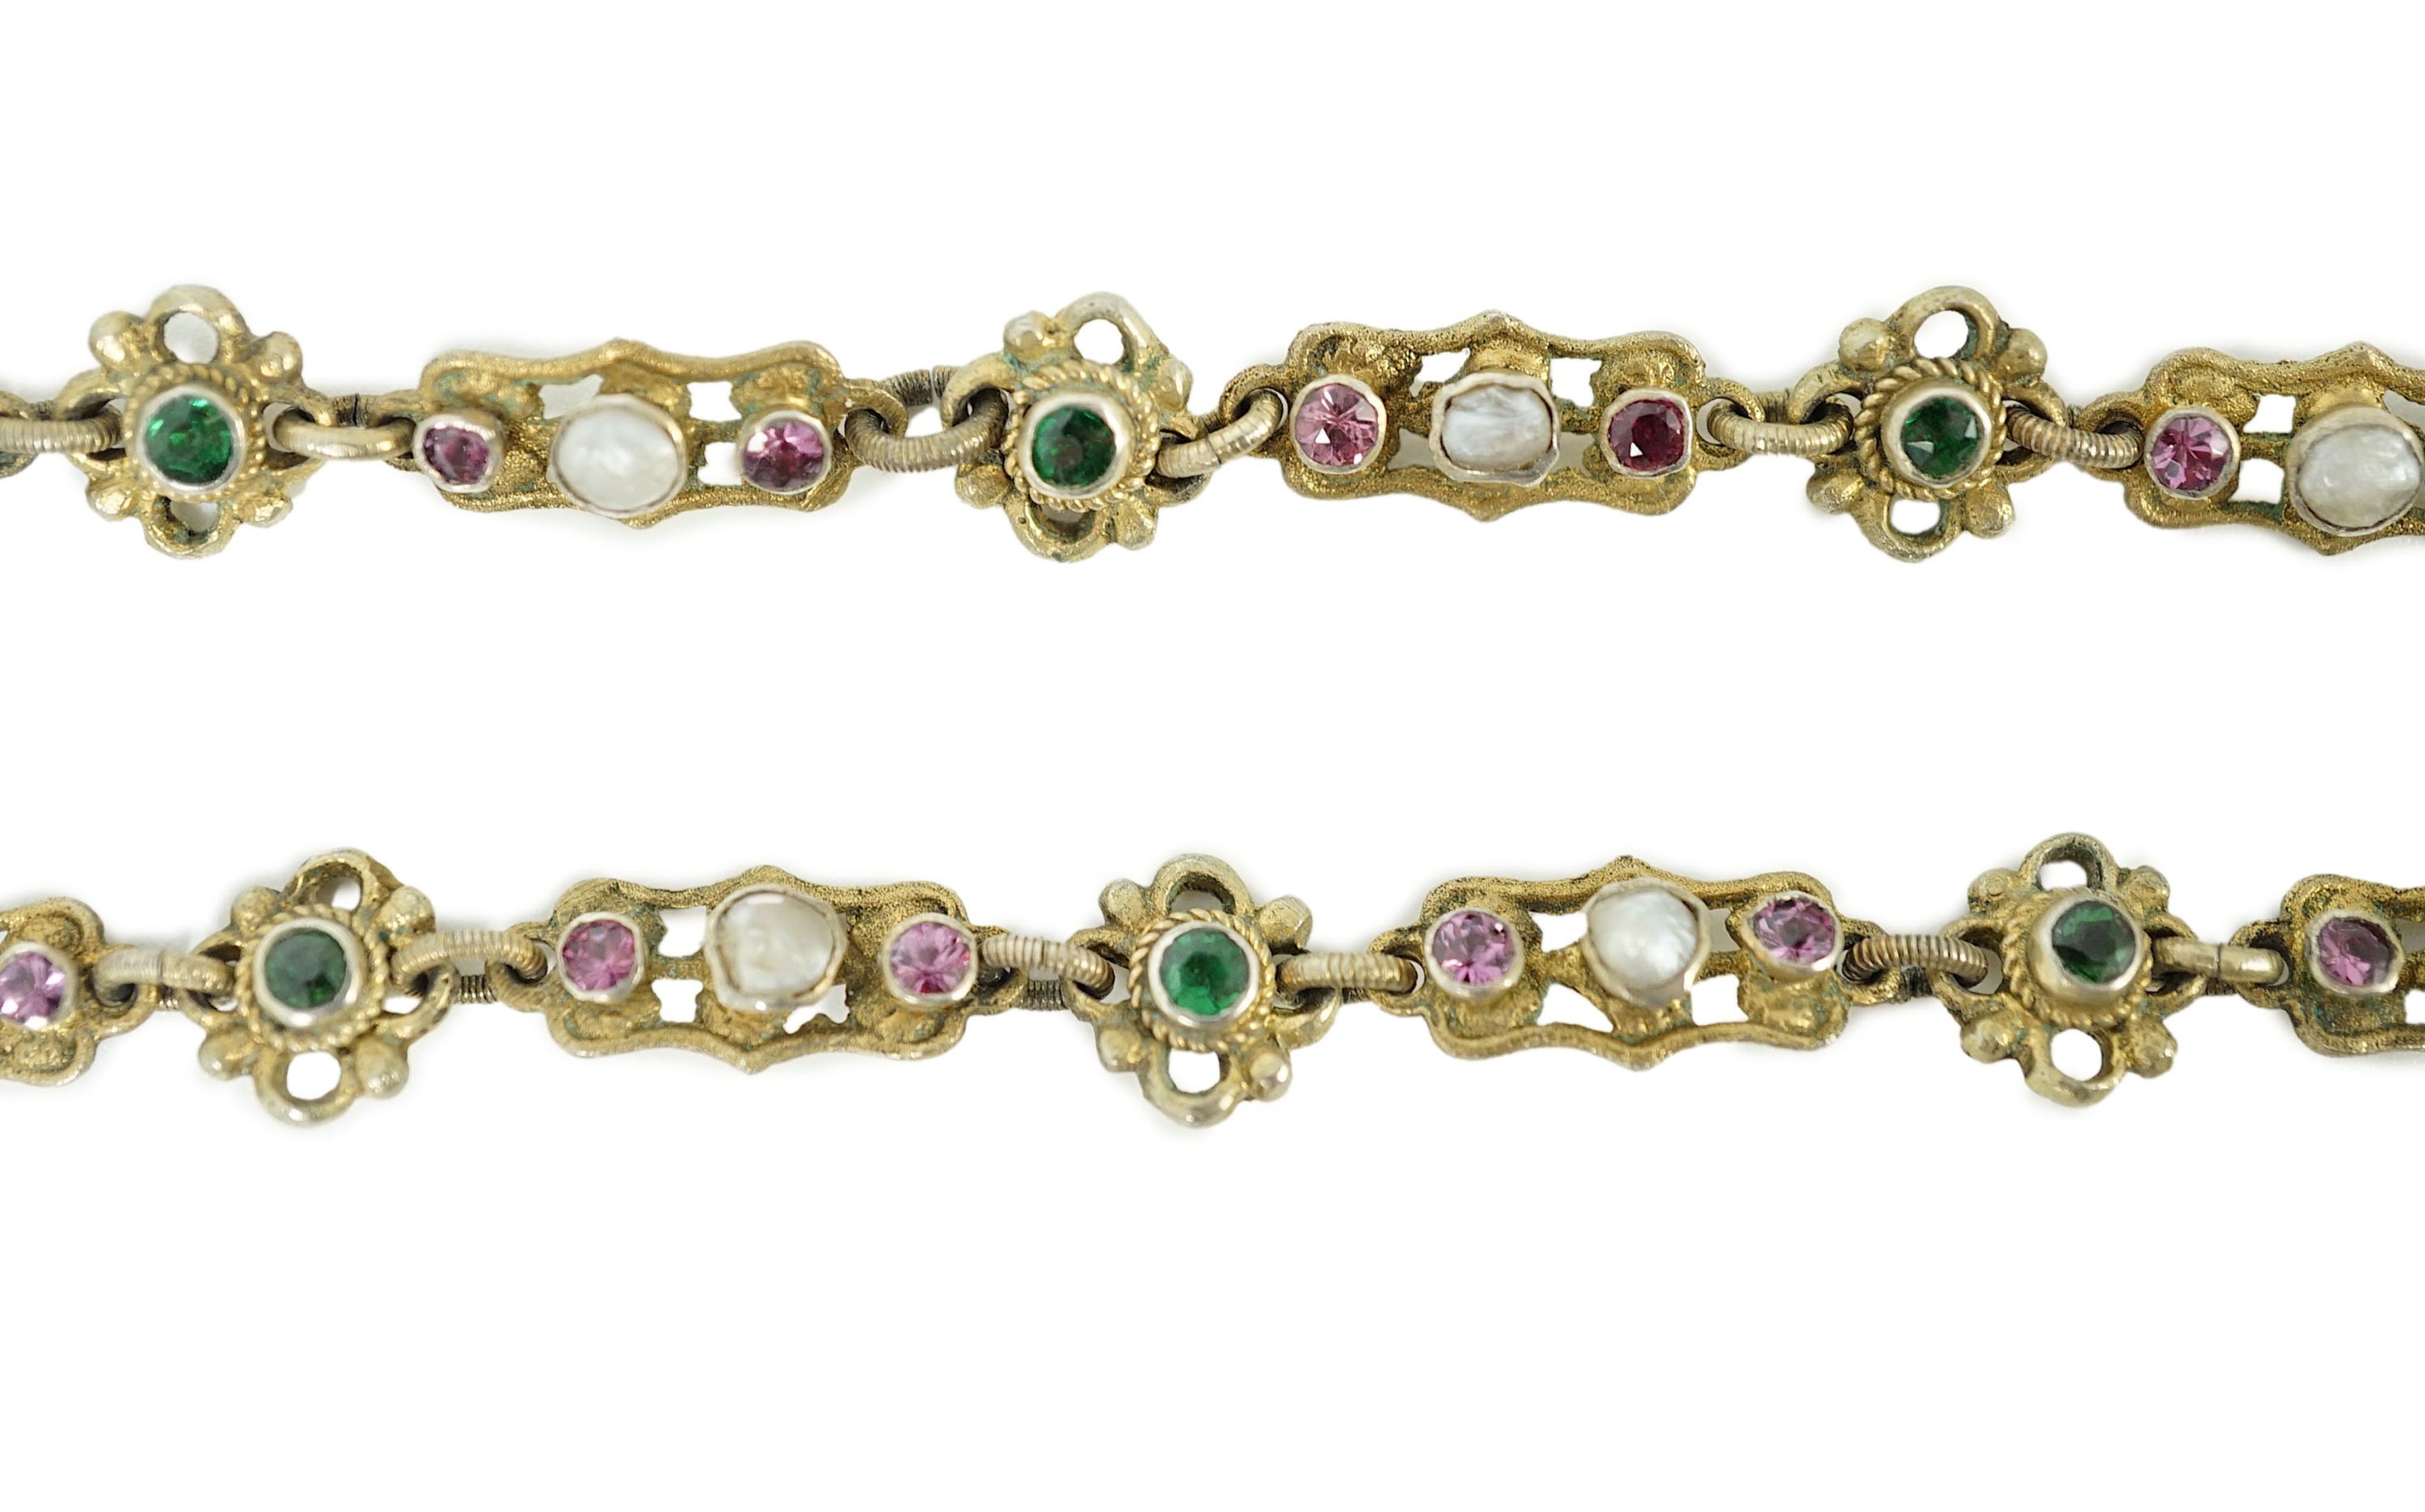 An early 20th century pierced and engraved silver gilt and gem set choker necklace, in the Suffragette colours